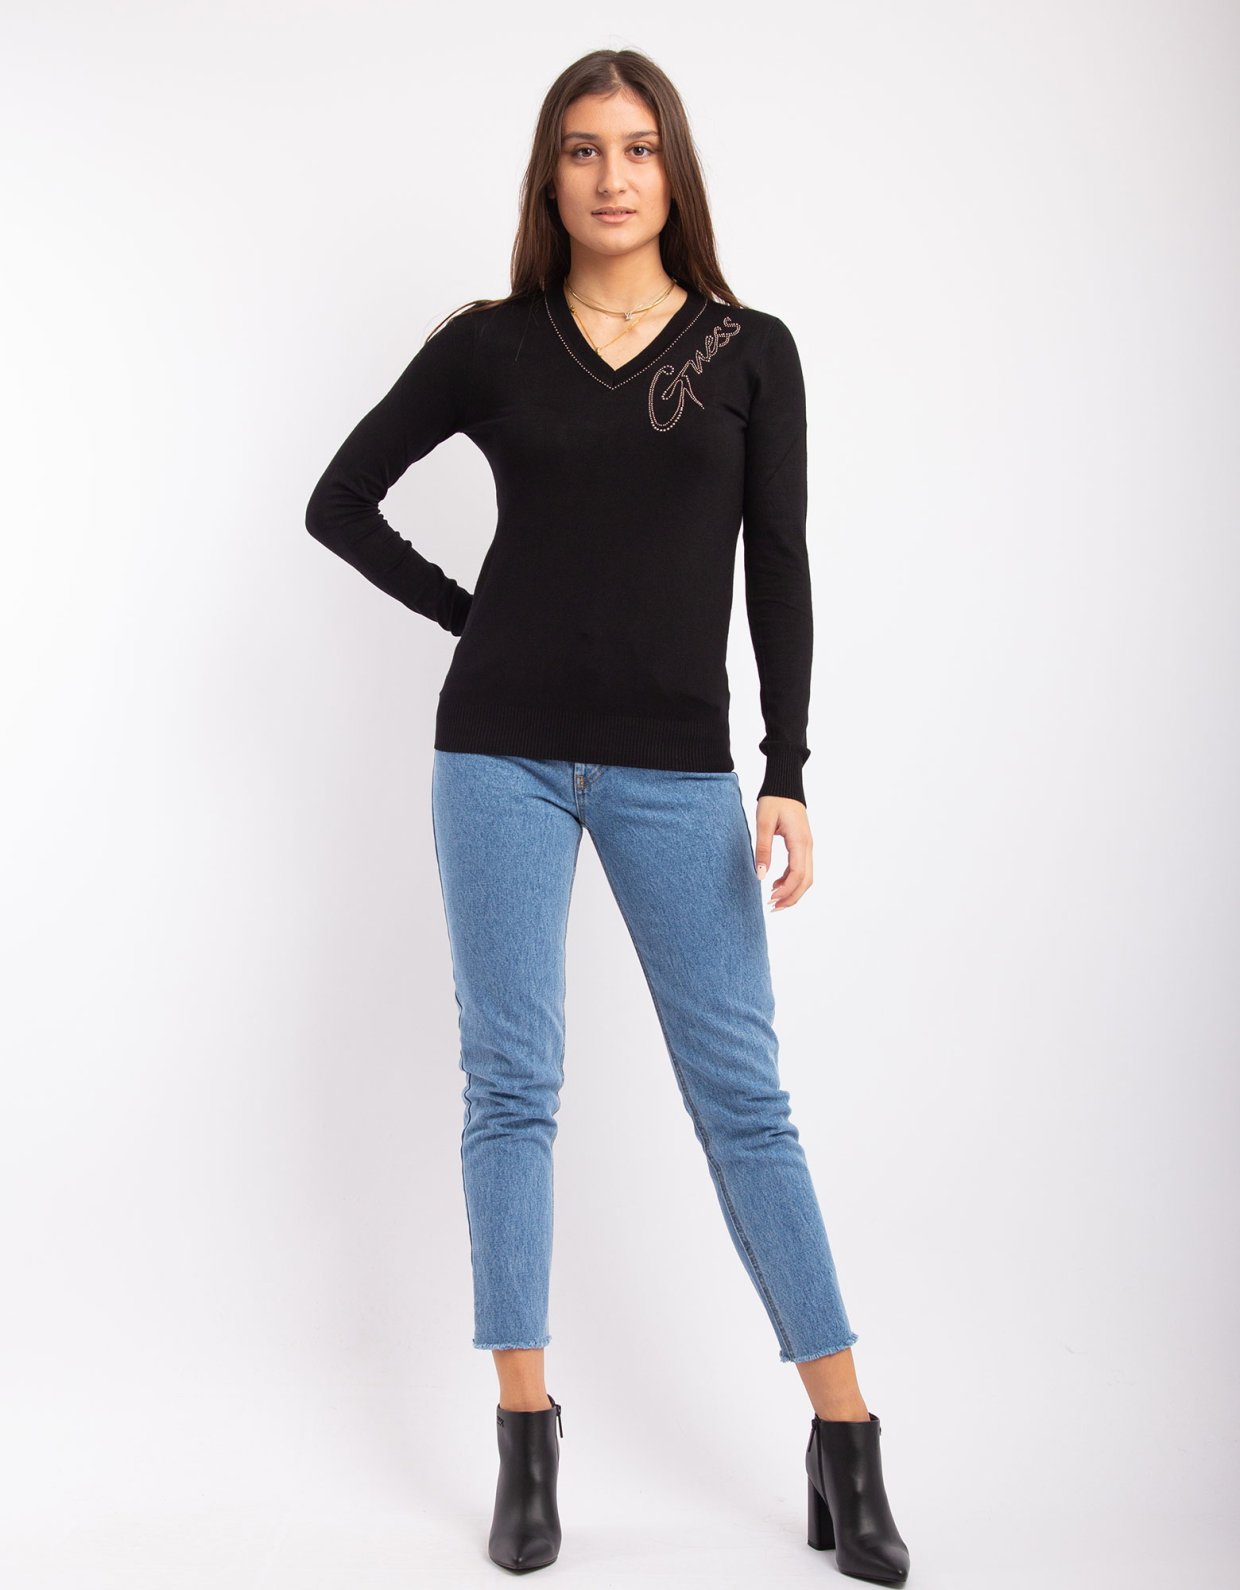 Guess Edith sweater black